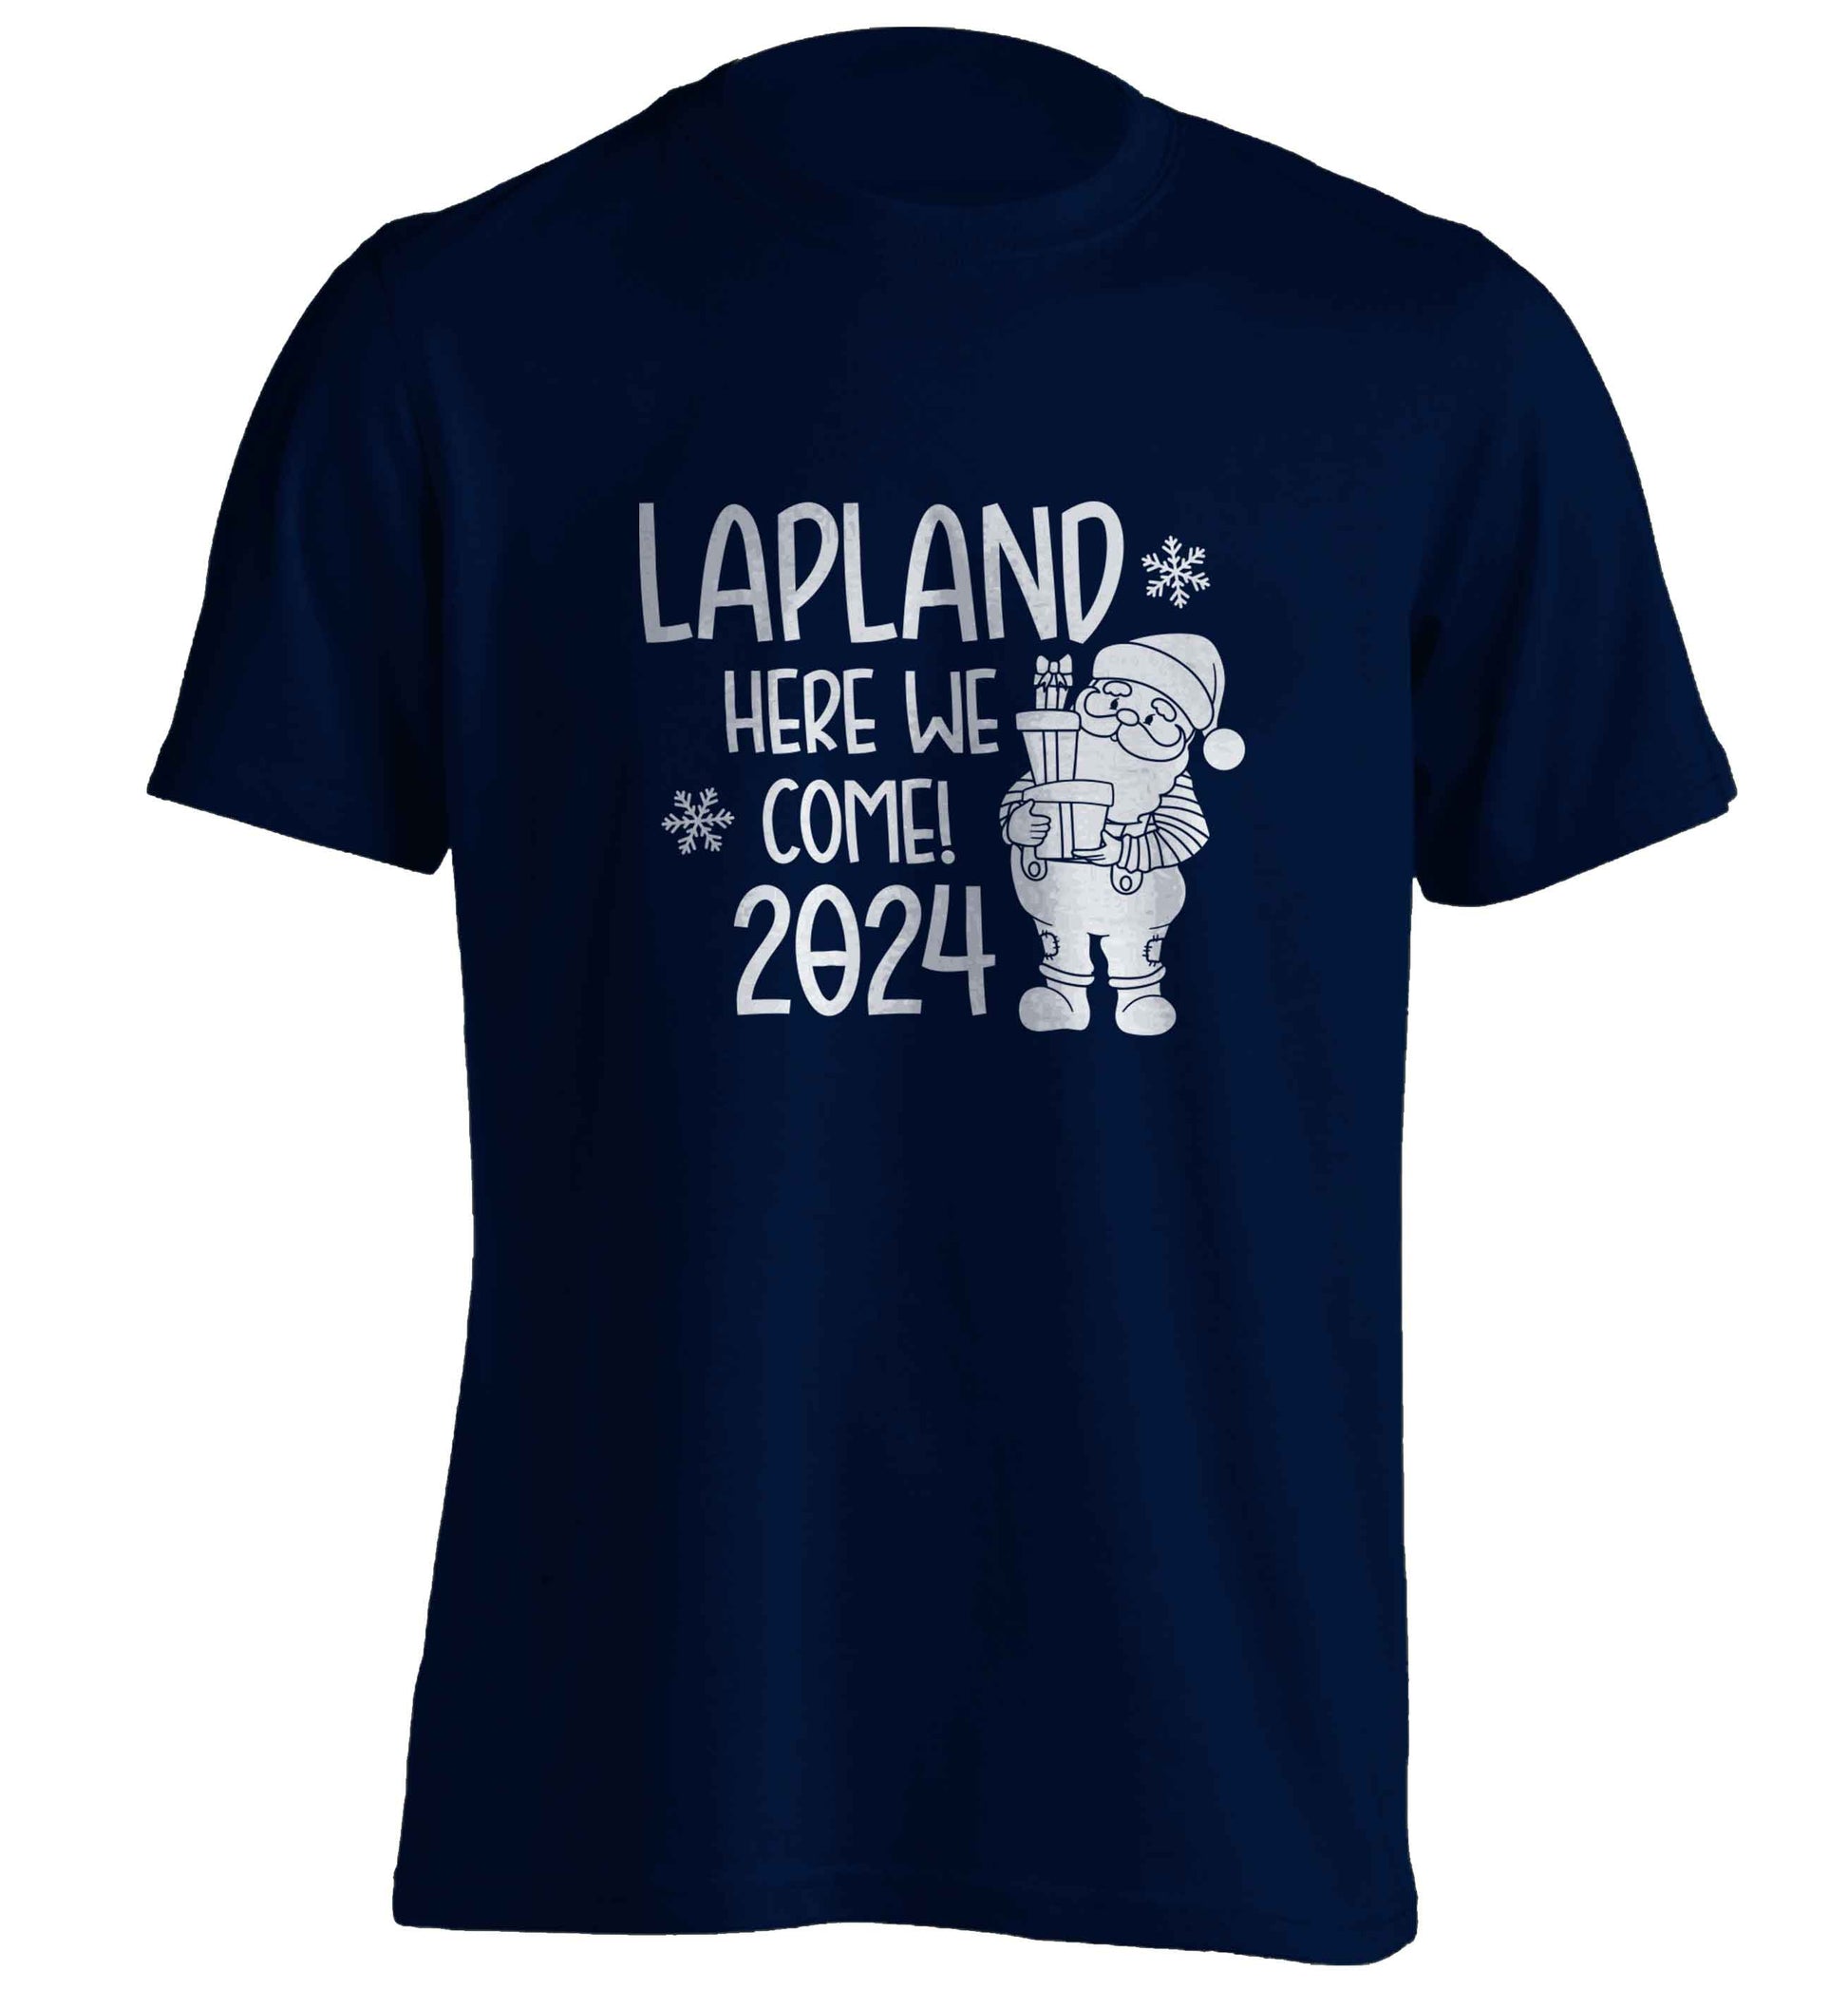 Lapland here we come adults unisex navy Tshirt 2XL